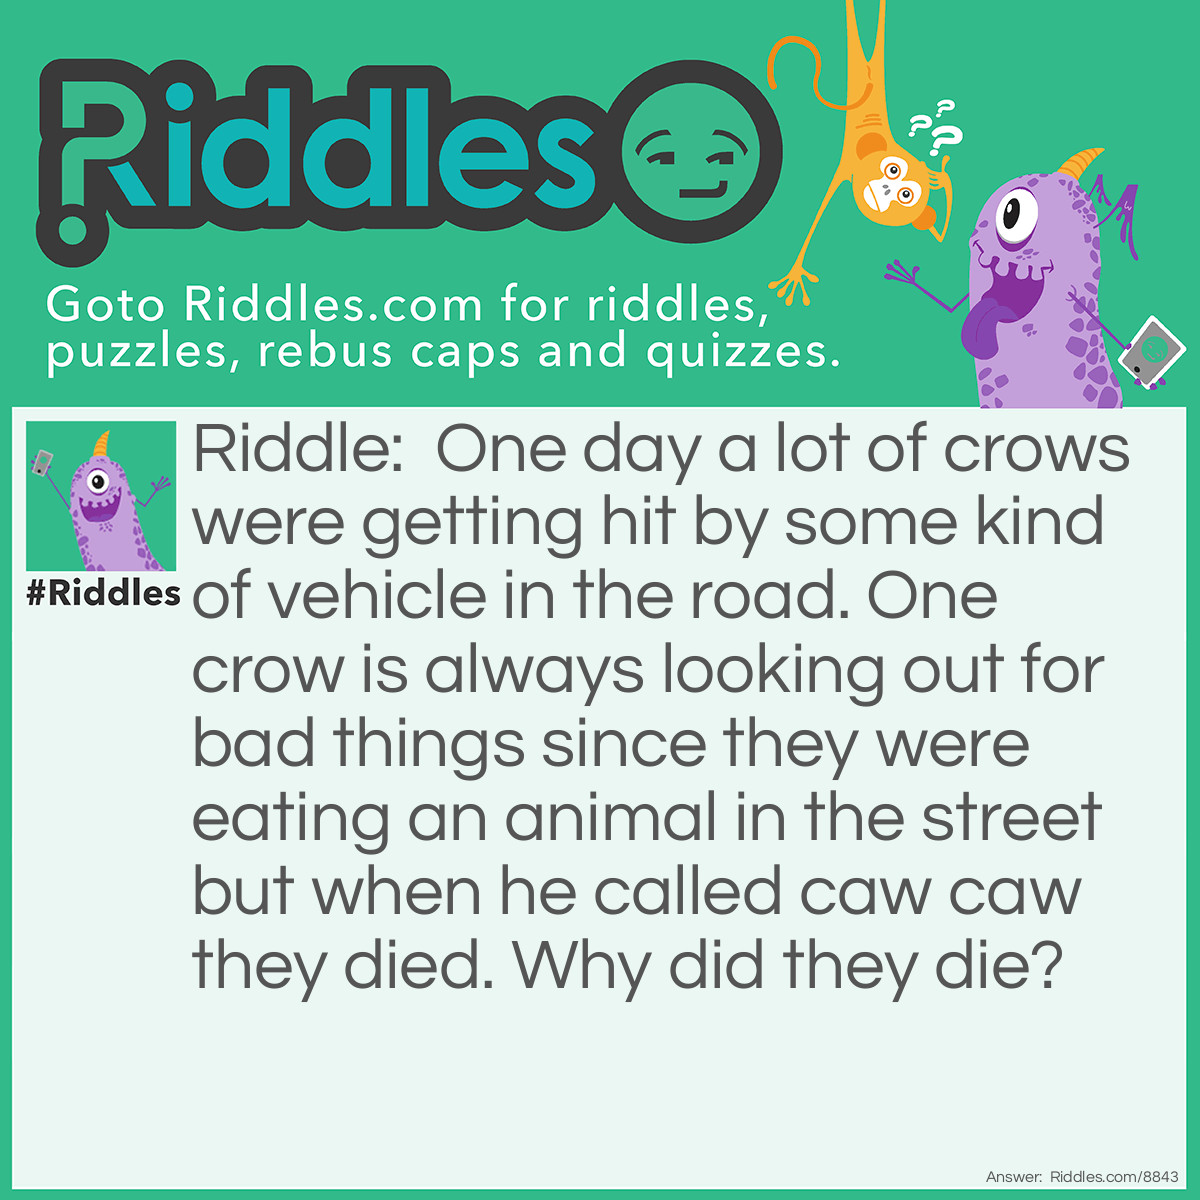 Riddle: One day a lot of crows were getting hit by some kind of vehicle in the road. One crow is always looking out for bad things since they were eating an animal in the street but when he called caw caw they died. Why did they die? Answer: The crow said Caw Caw not motorcycle motorclycle